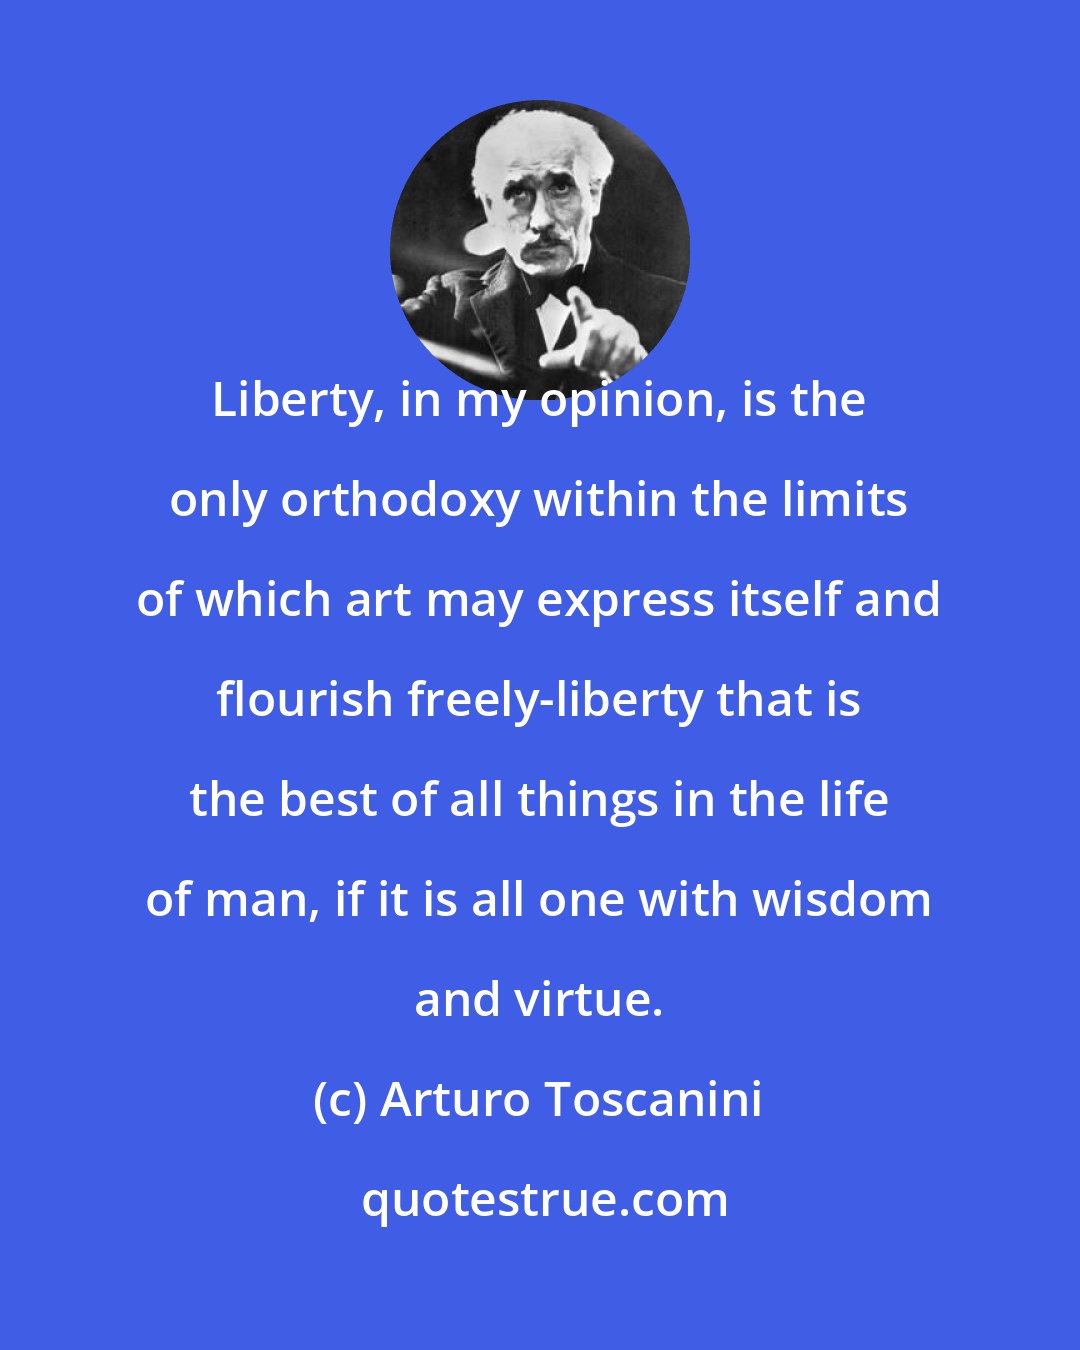 Arturo Toscanini: Liberty, in my opinion, is the only orthodoxy within the limits of which art may express itself and flourish freely-liberty that is the best of all things in the life of man, if it is all one with wisdom and virtue.